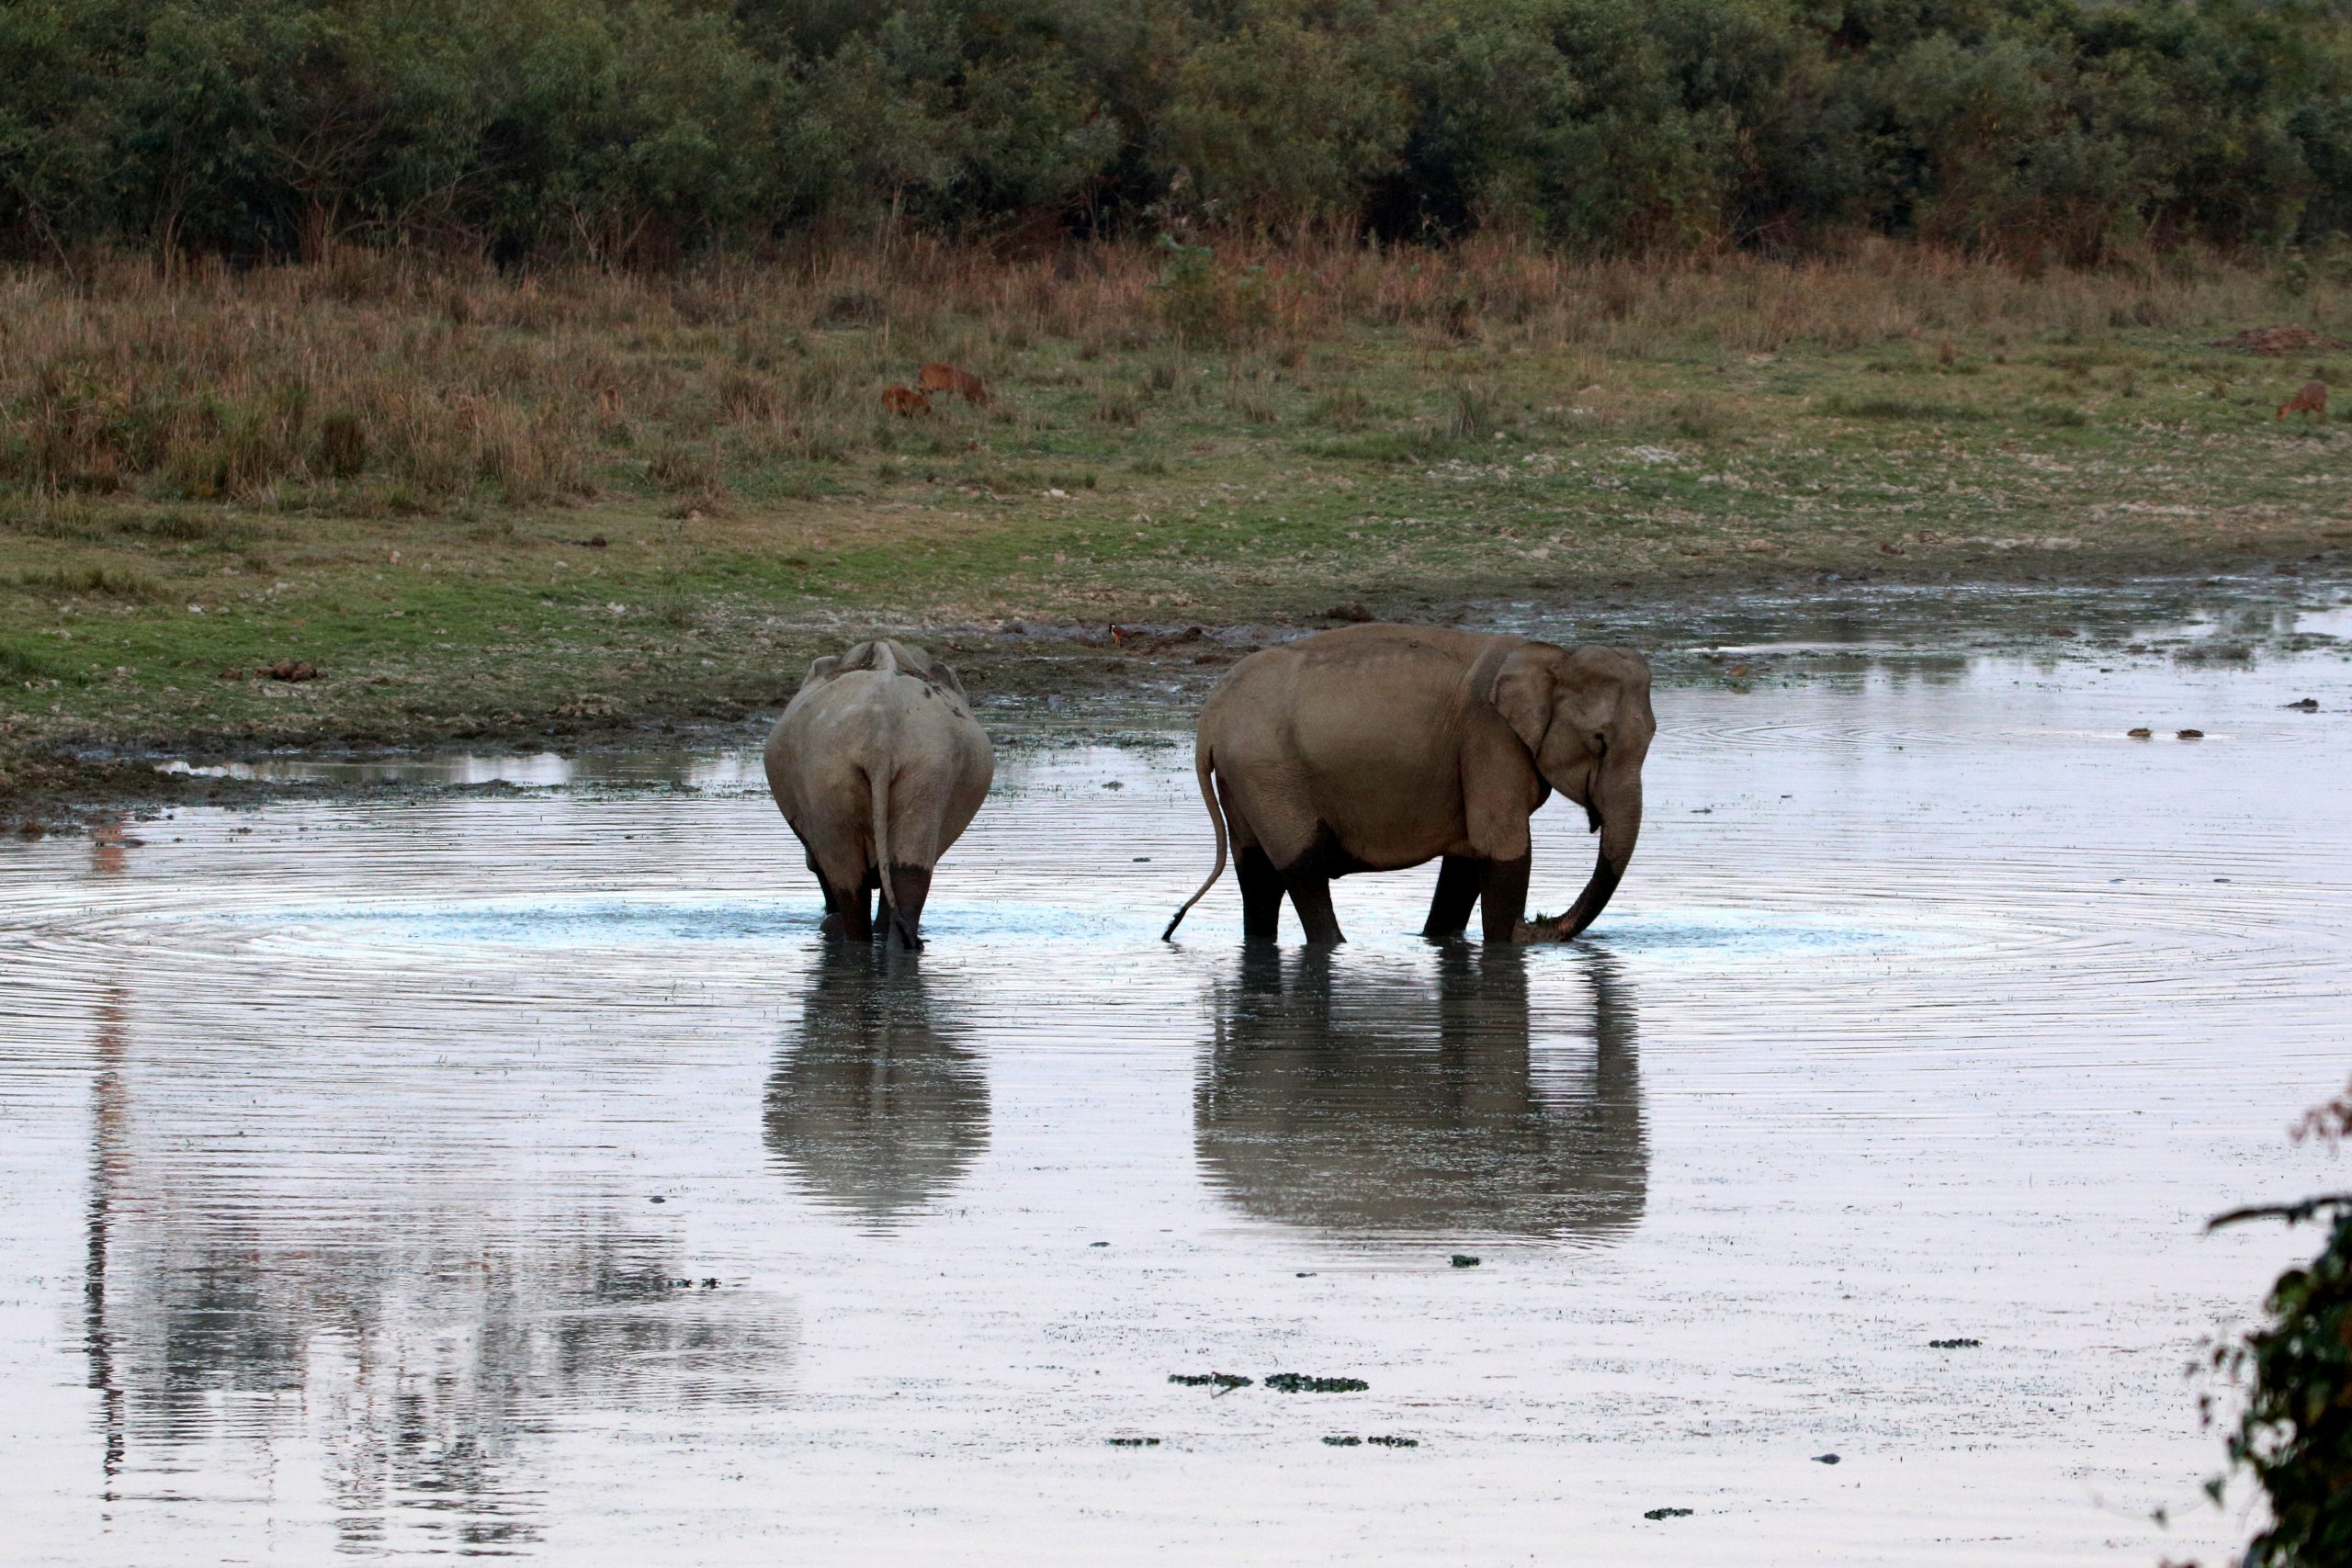 A pair of elephants in water